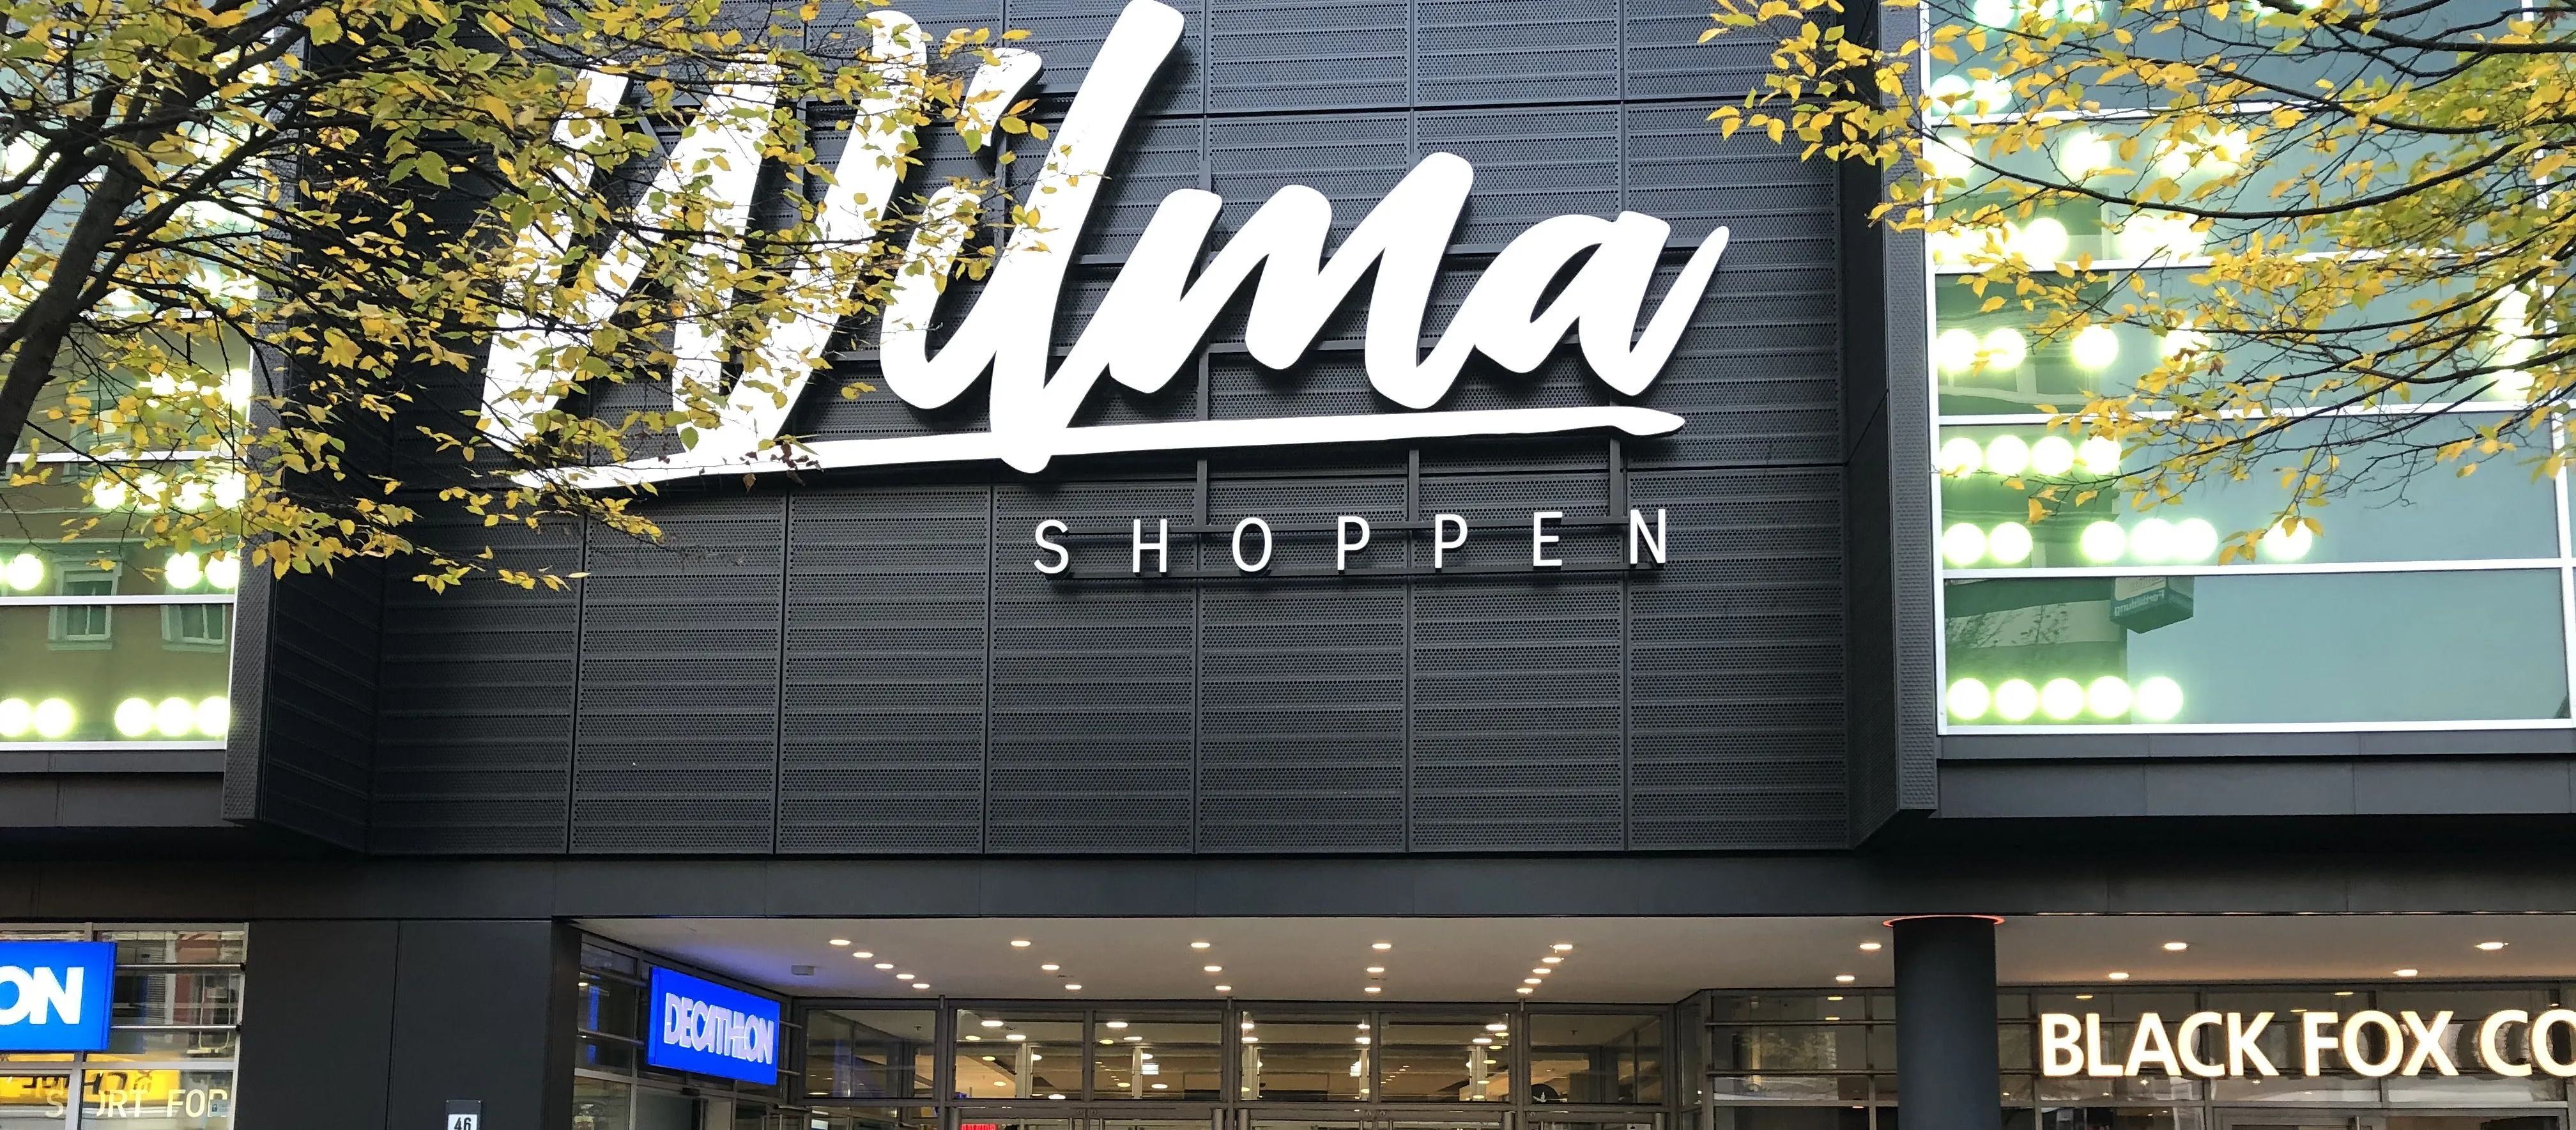 Wilma Shoppen in Germany, europe | Fragrance,Sporting Equipment,Handbags,Shoes,Clothes,Cosmetics,Swimwear - Country Helper